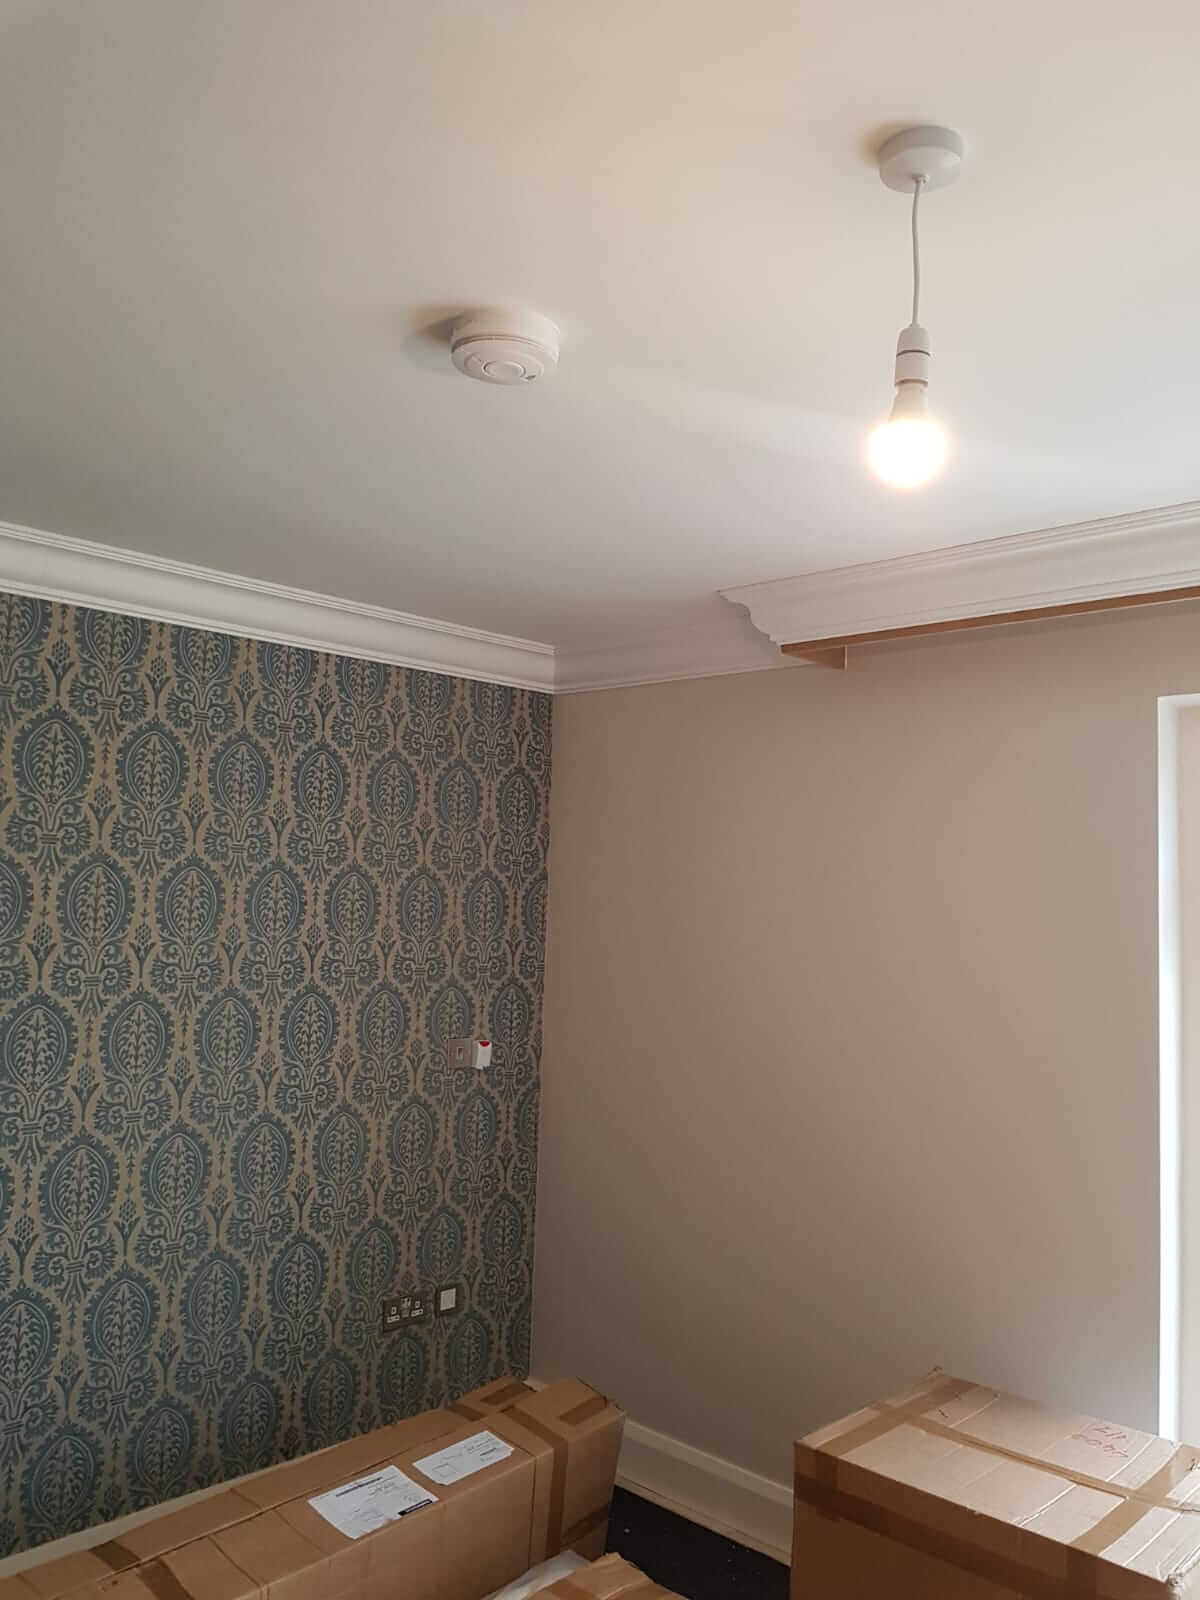 Charlotte - Lightweight Coving in an unfurnished room